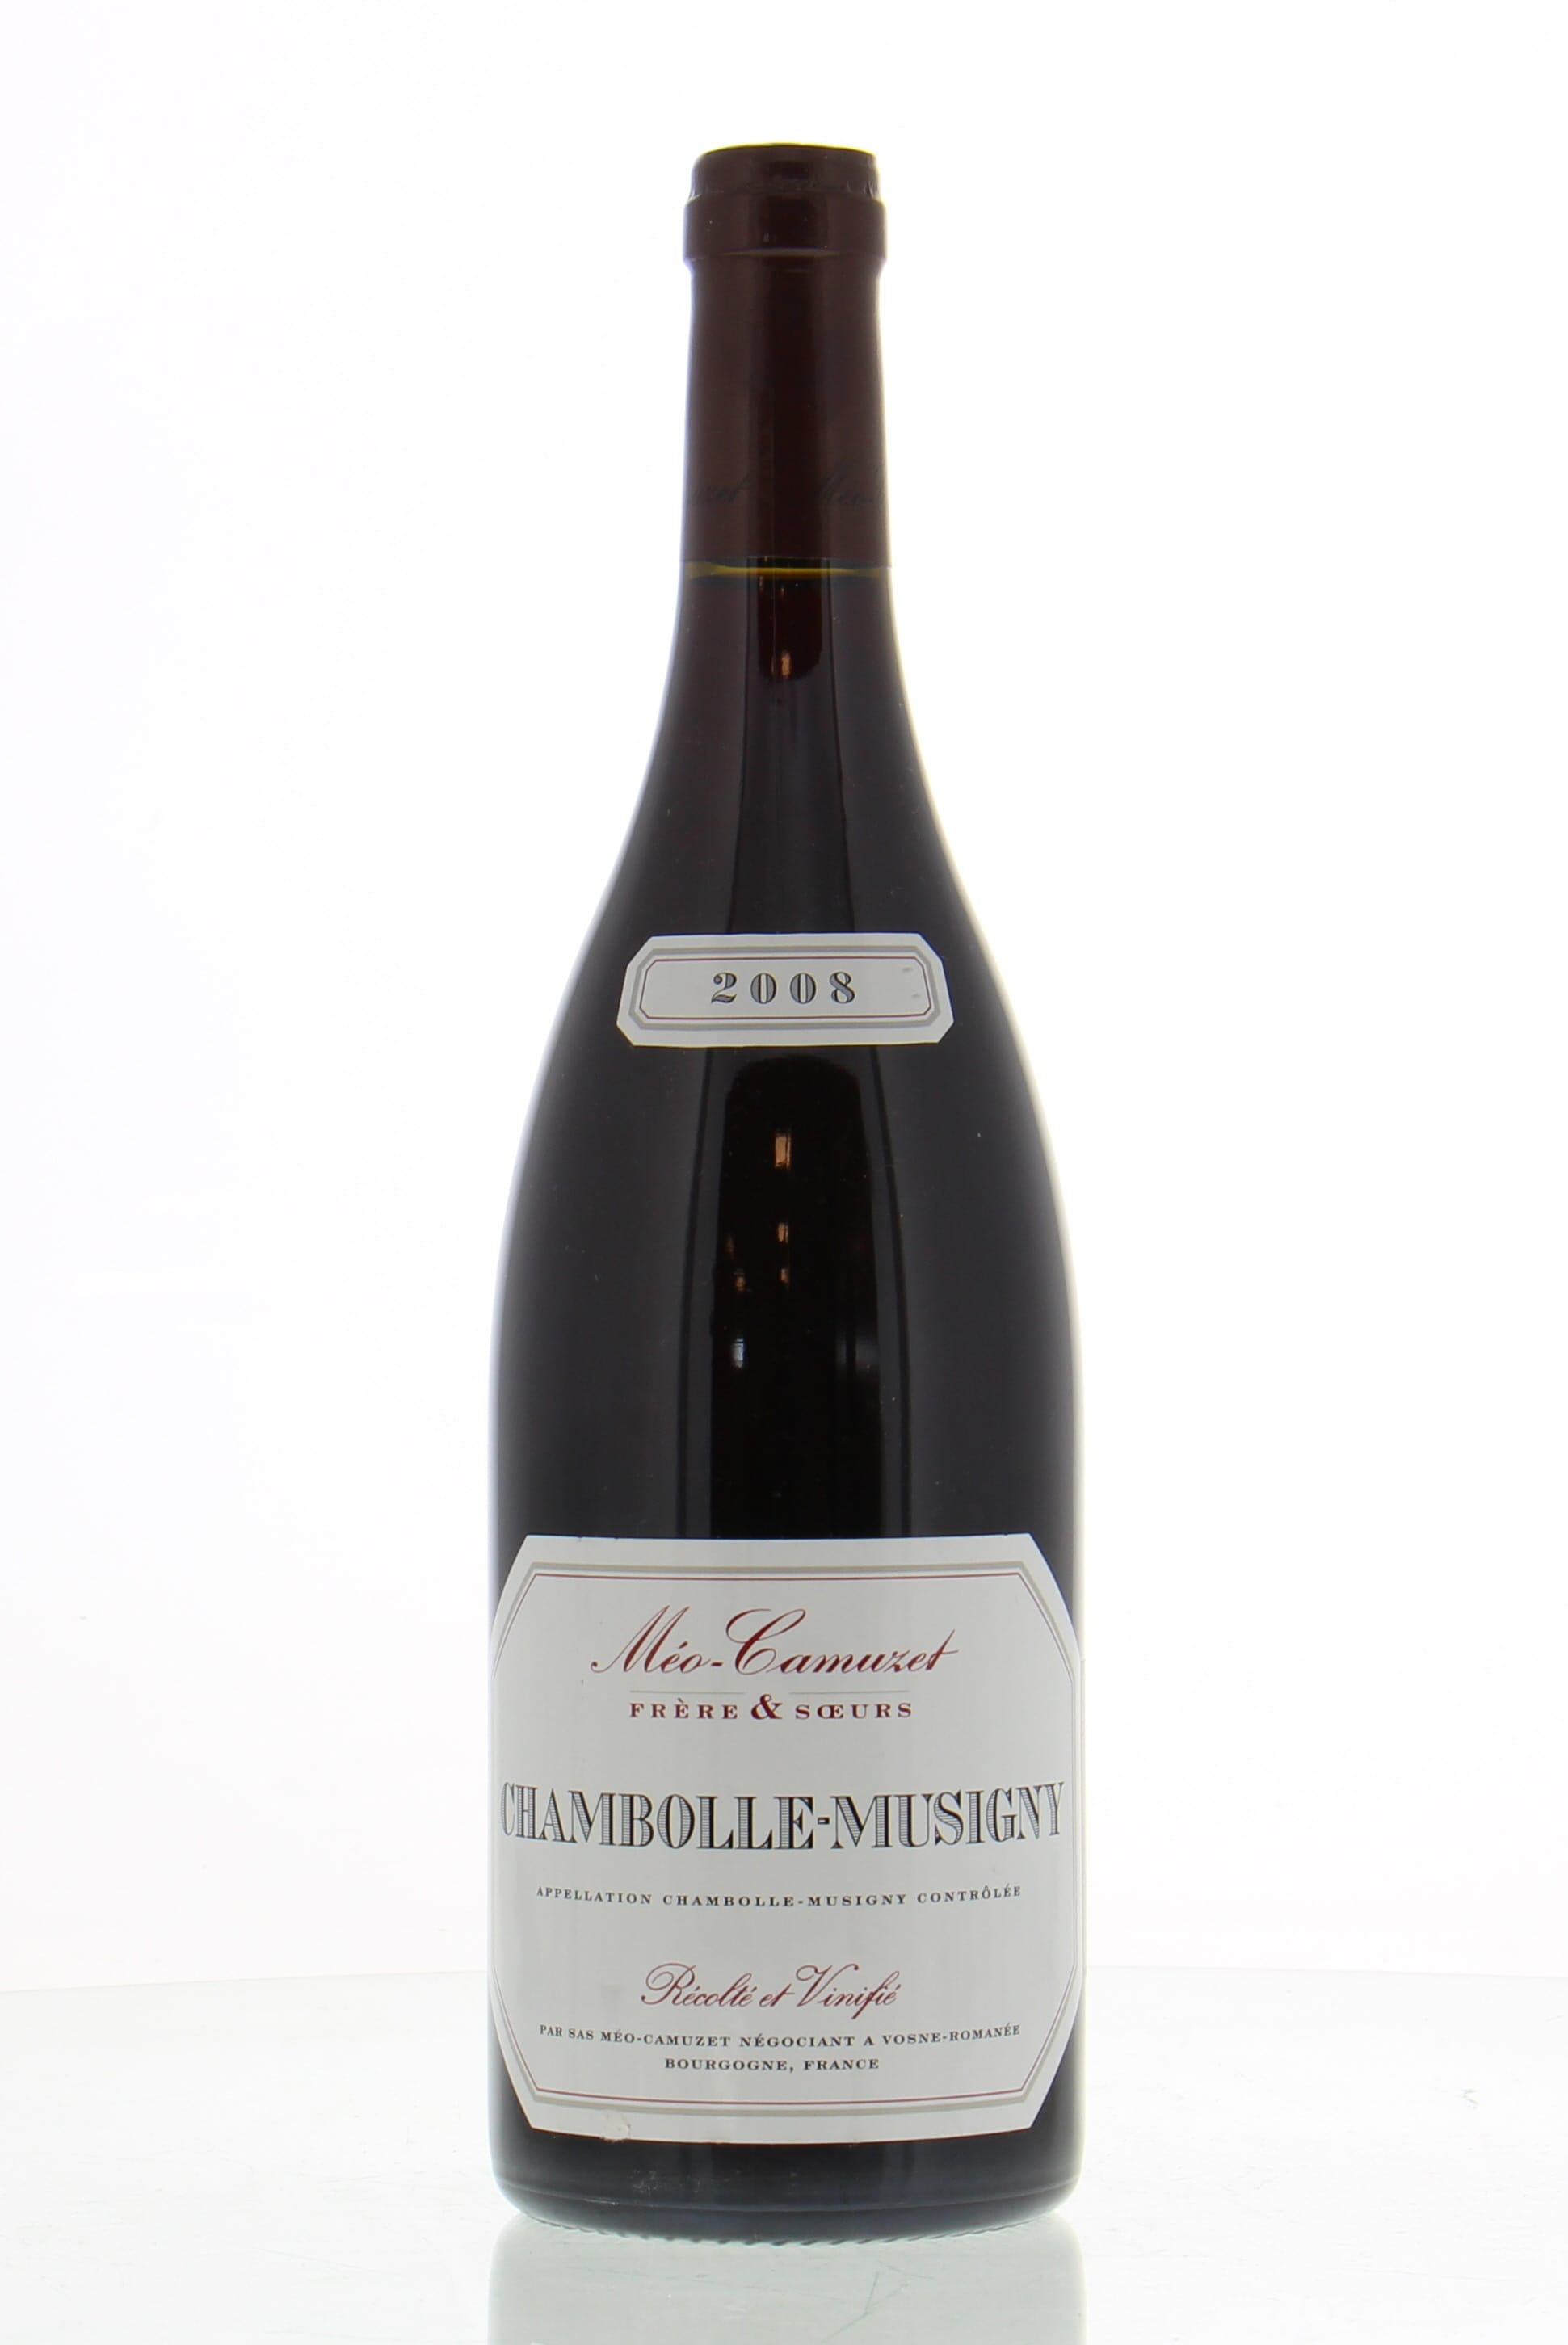 Meo Camuzet - Chambolle Musigny 2008